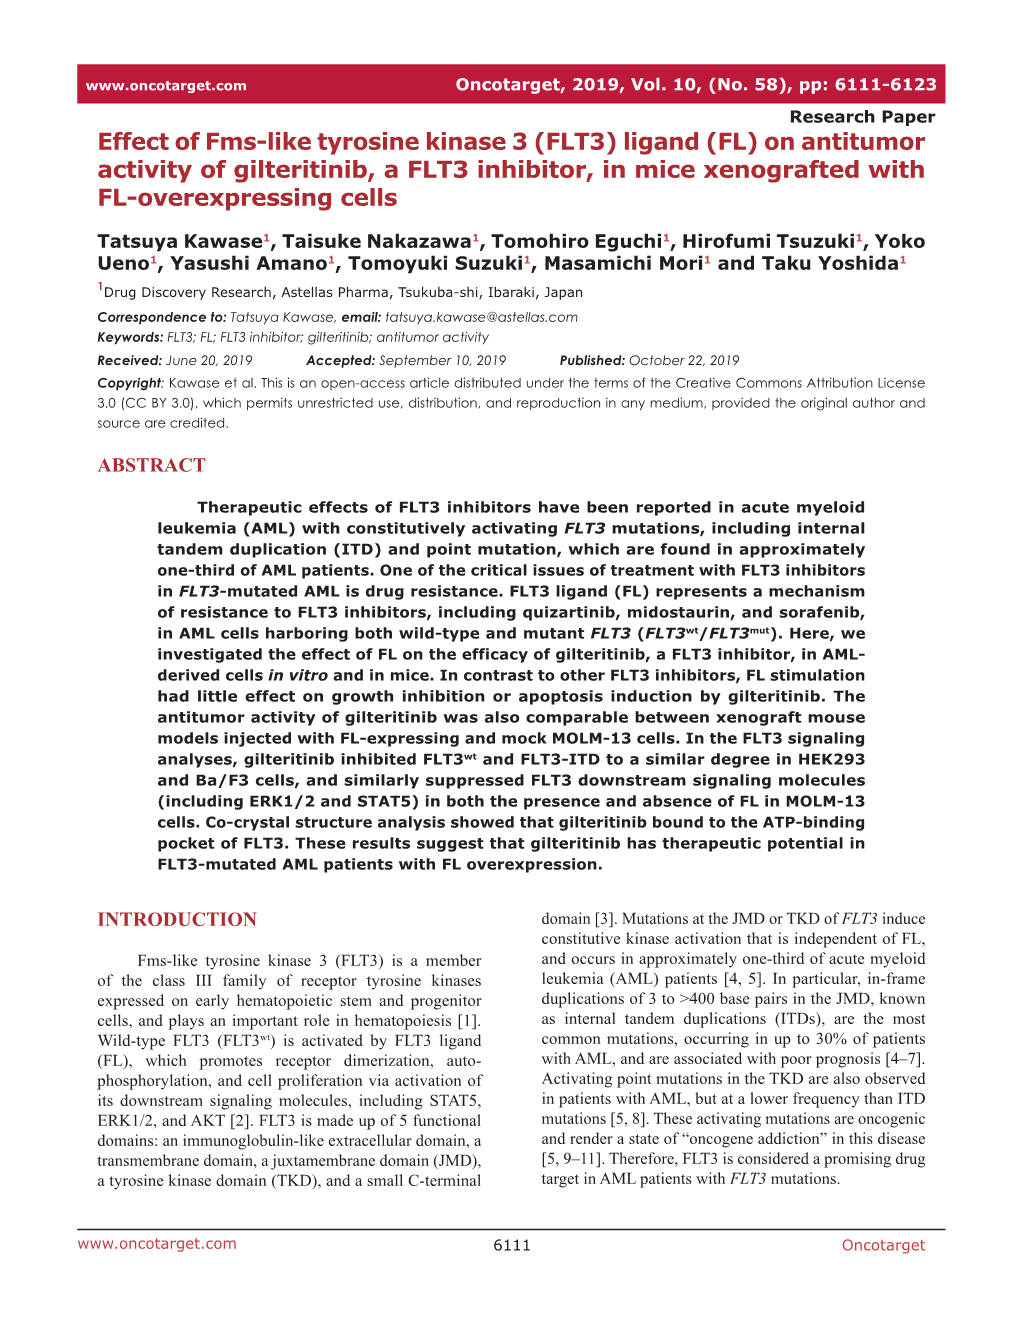 (FL) on Antitumor Activity of Gilteritinib, a FLT3 Inhibitor, in Mice Xenografted with FL-Overexpressing Cells